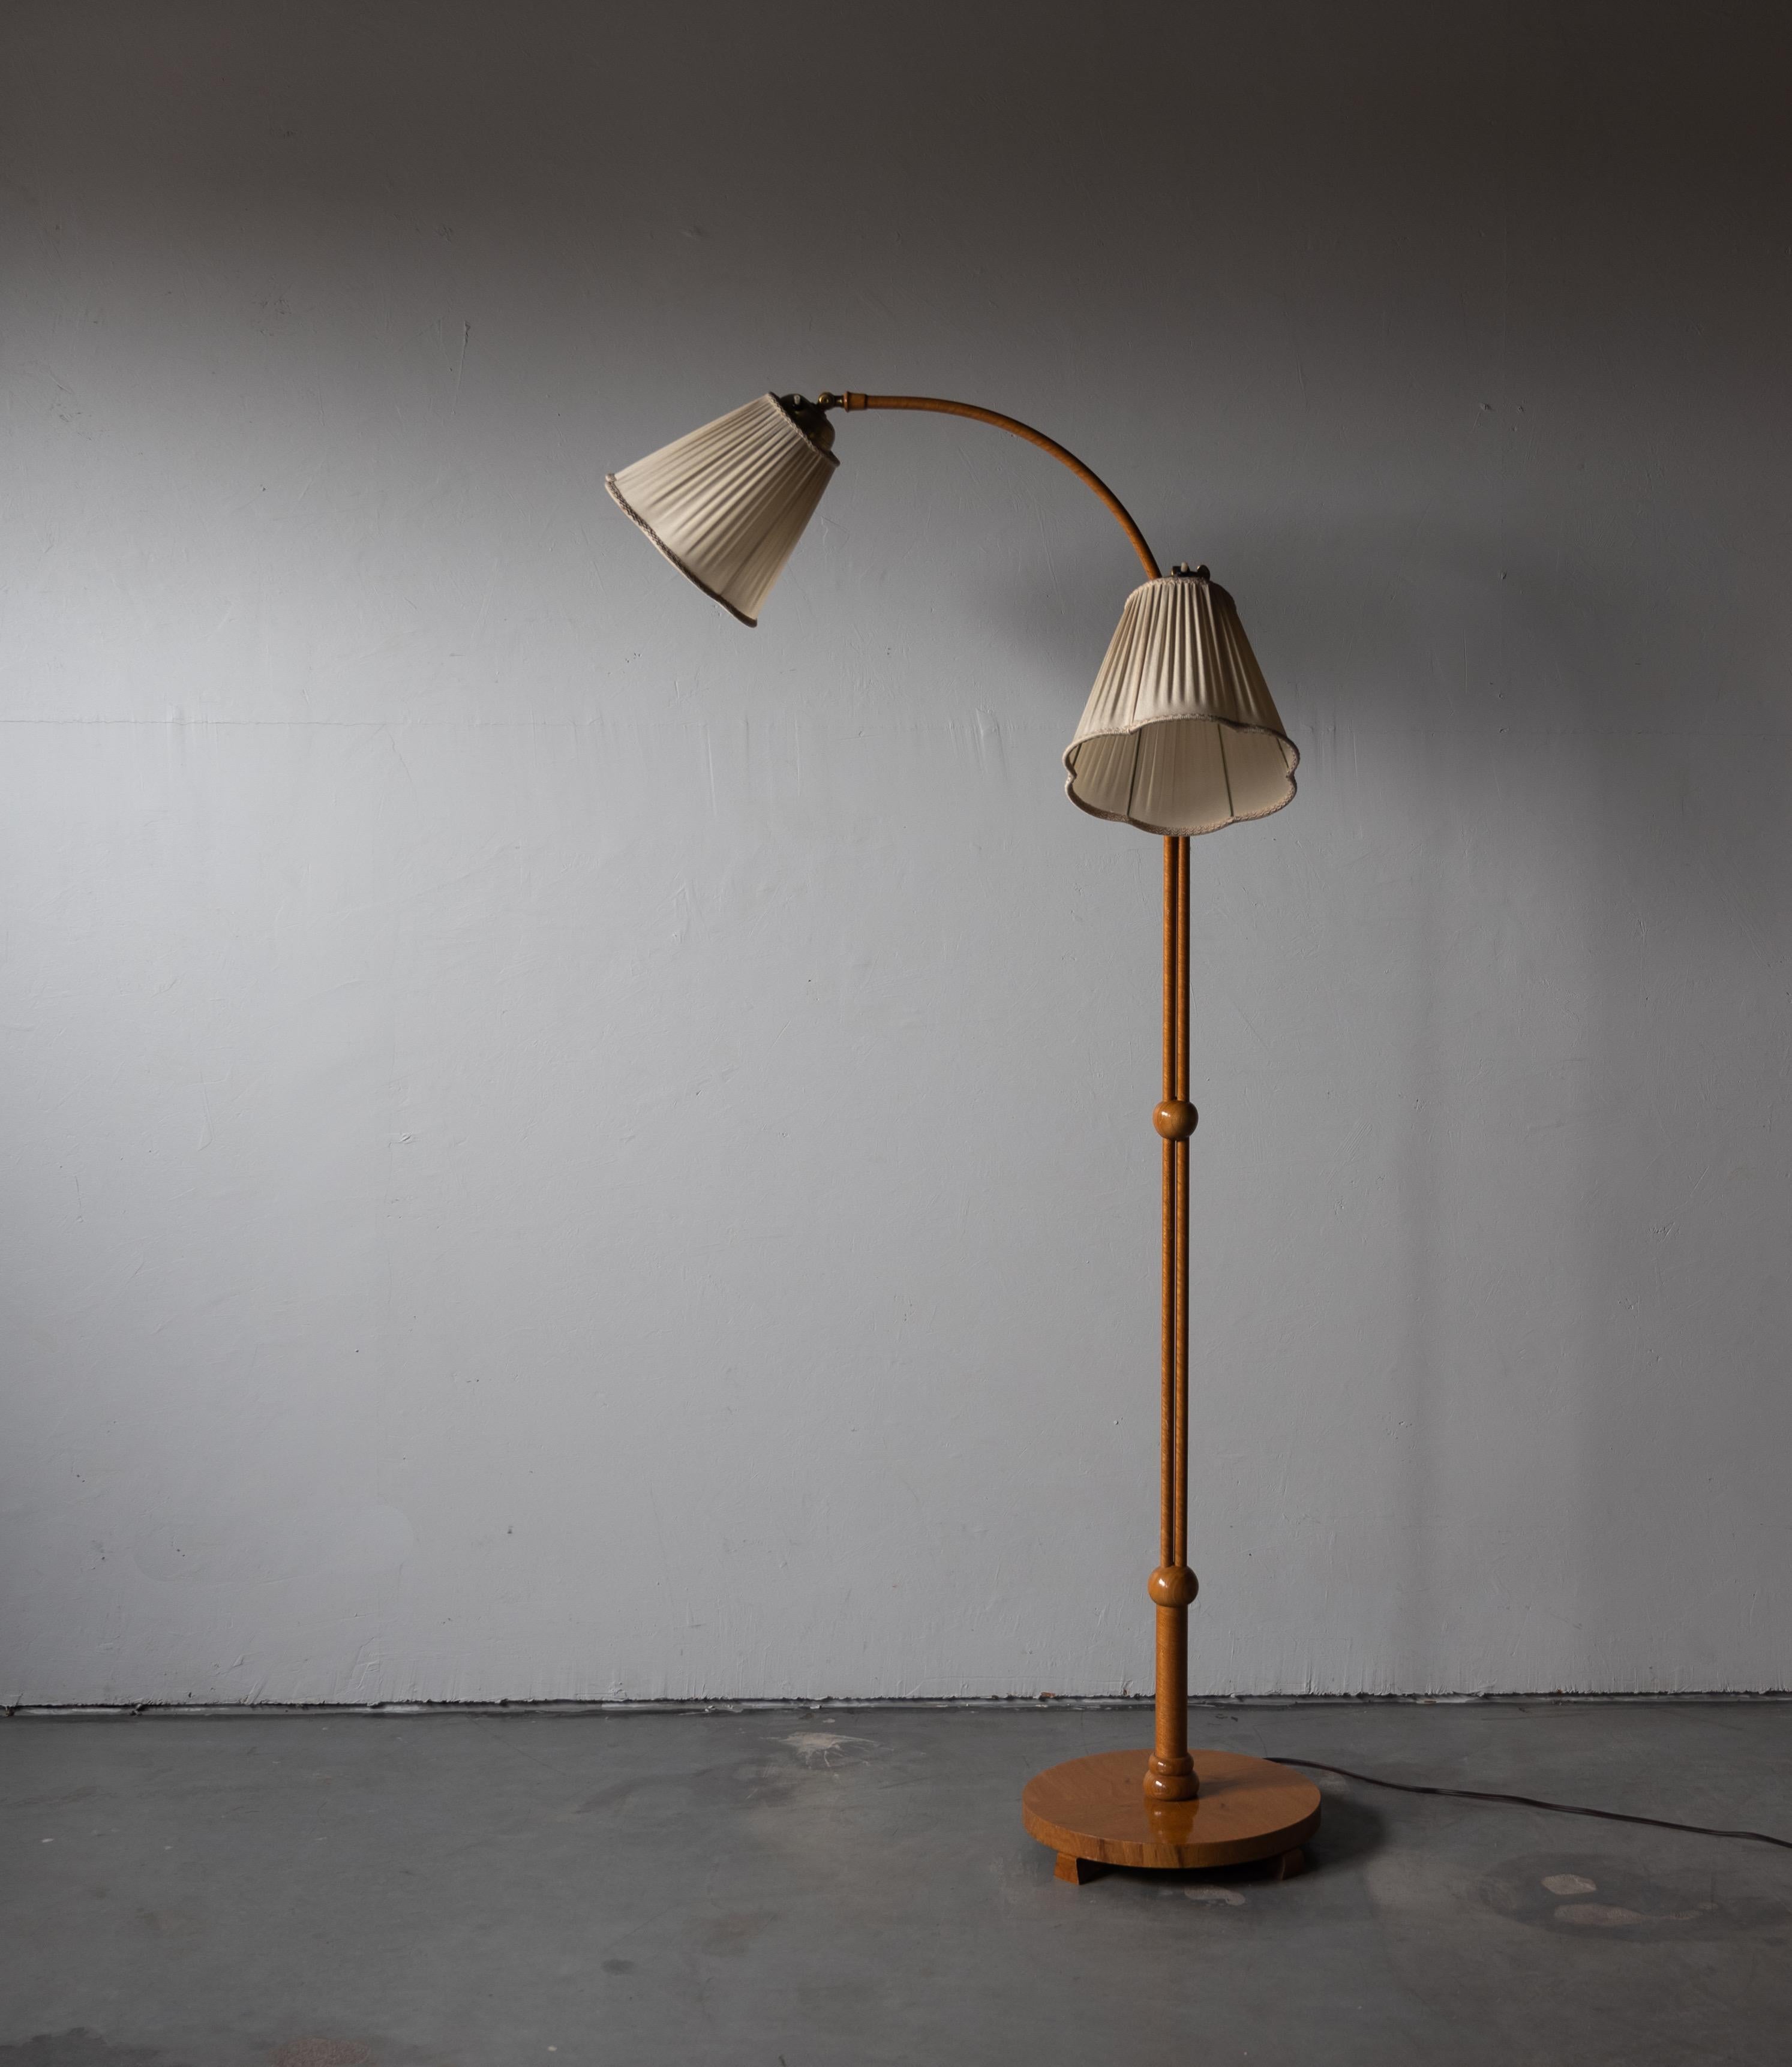 An two-armed floor lamp. Designed by an unknown Swedish designer, 1930s. Produced in wood and brass. Vintage lampshades.

Other designers working in the organic style include Jean Royère, Gio Ponti, Vladimir Kagan, Ico Parisi, and George Nakashima.